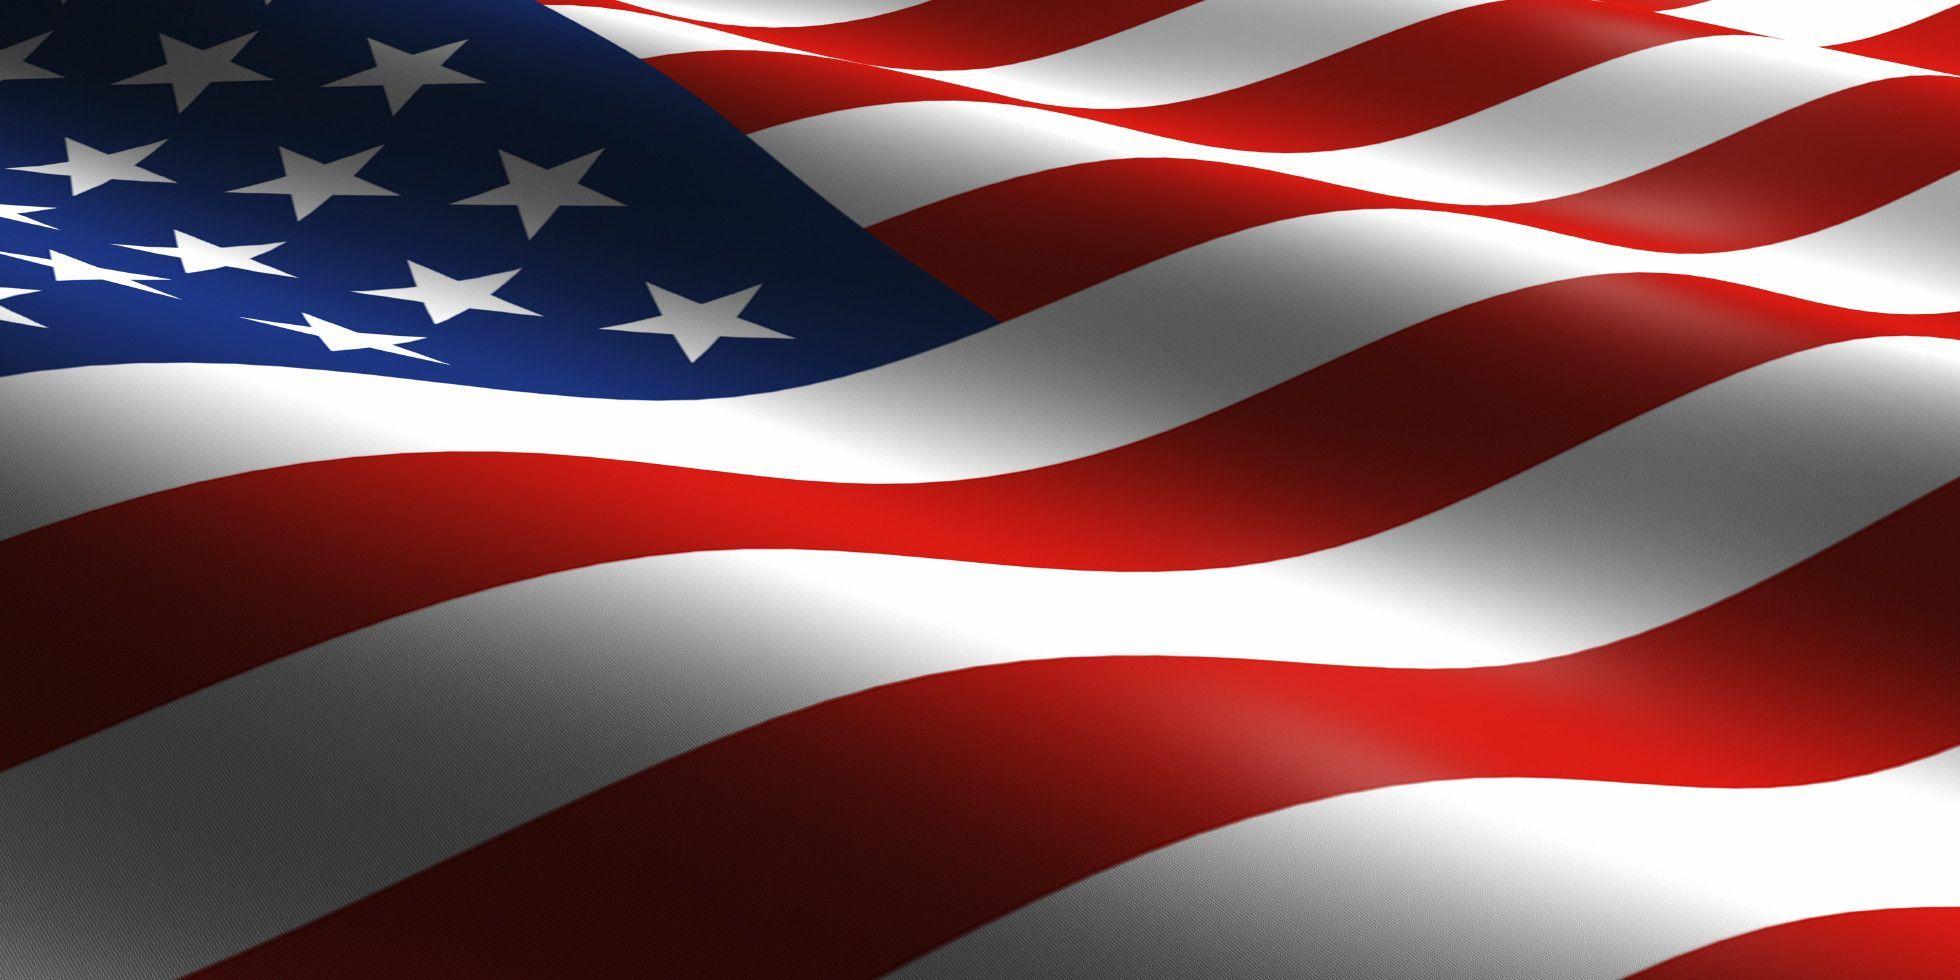 HD Memorial Day Background Image, Wallpaper Free Download. Happy